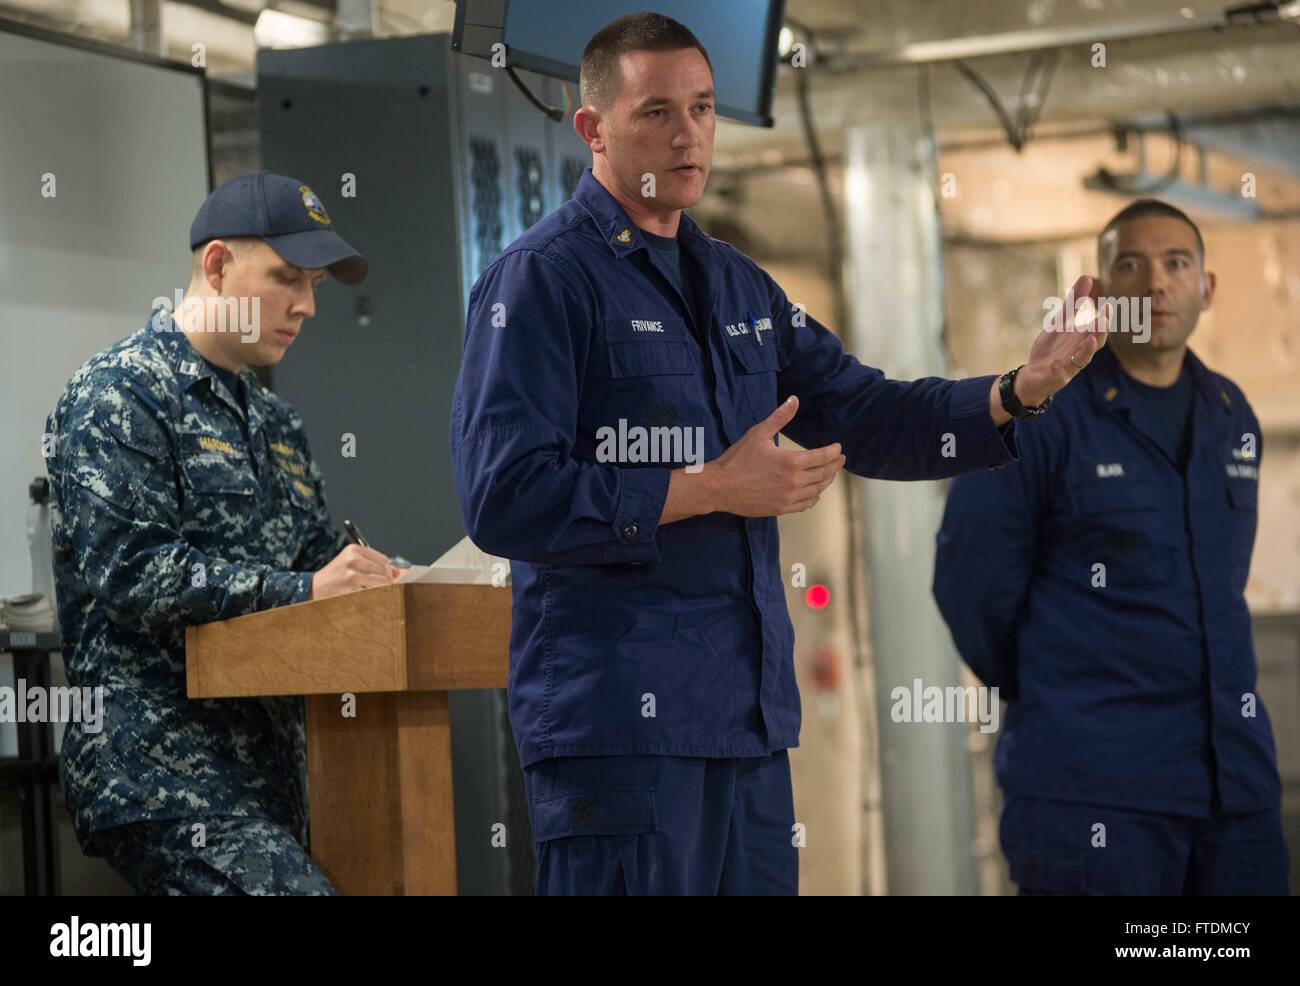 160215-N-WV703-039 SEKONDI, Ghana (Feb. 15, 2016) Chief Operations Specialist Jason Frivance, a member of the U.S. Coast Guard Law Enforcement Detachment, addresses Ghanaian navy and combined boarding team members along with U.S. Navy and U.S. Coast Guard during an exercise debrief aboard USNS Spearhead (T-EPF 1) Feb. 15, 2016. The Military Sealift Command expeditionary fast transport vessel USNS Spearhead is on a scheduled deployment in the U.S. 6th Fleet area of operations to support the international collaborative capacity-building program Africa Partnership Station. (U.S. Navy photo by Mas Stock Photo